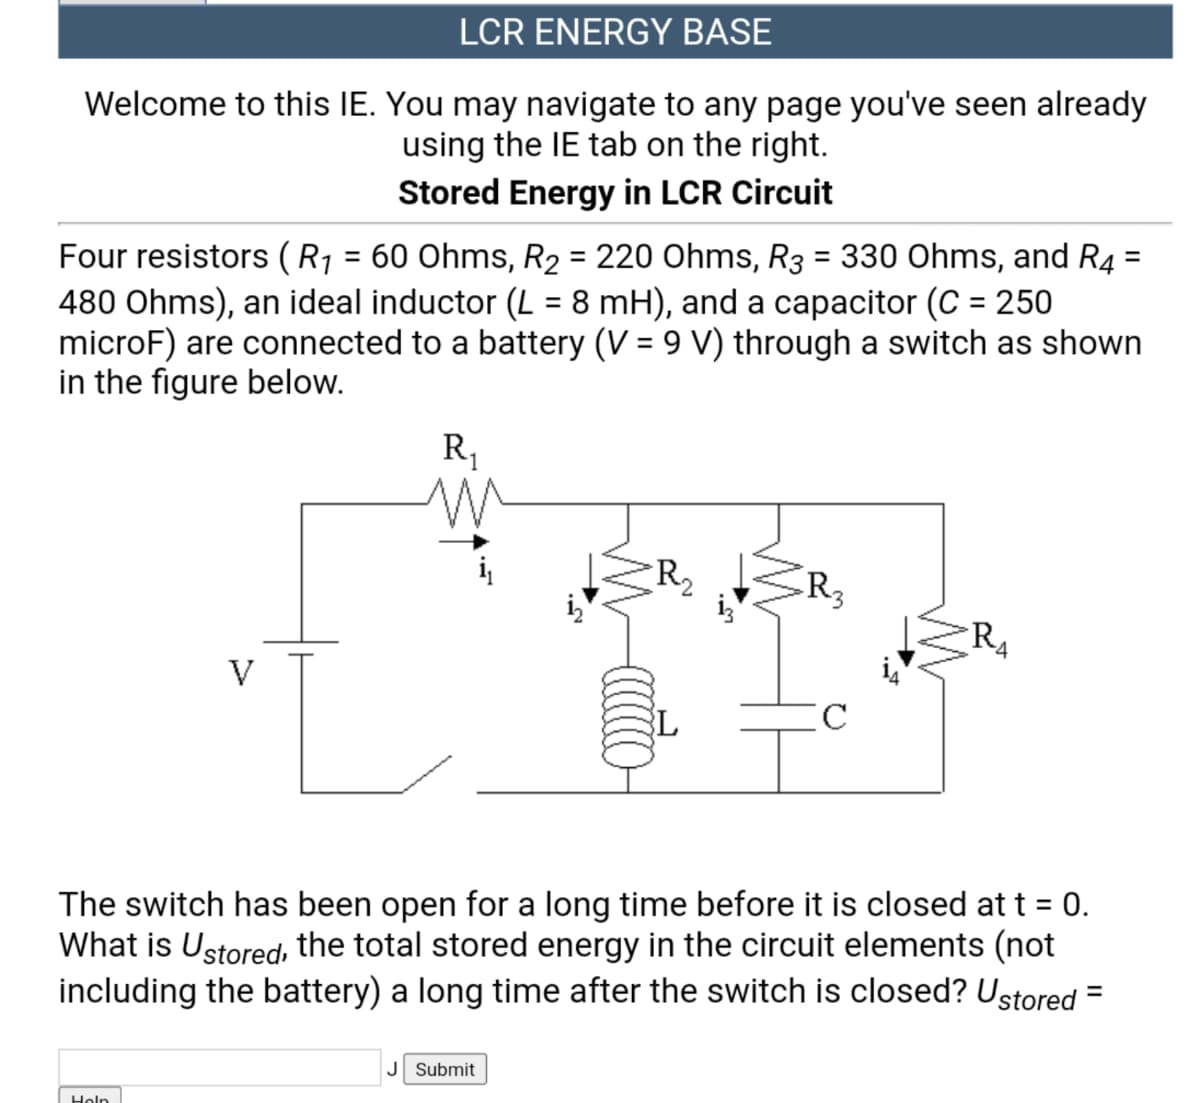 LCR ENERGY BASE
Welcome to this IE. You may navigate to any page you've seen already
using the IE tab on the right.
Stored Energy in LCR Circuit
Four resistors (R1 = 60 Ohms, R2 = 220 Ohms, R3 = 330 Ohms, and R4 :
480 Ohms), an ideal inductor (L = 8 mH), and a capacitor (C = 250
microF) are connected to a battery (V = 9 V) through a switch as shown
in the figure below.
%3D
%3D
R1
R4
V
The switch has been open for a long time before it is closed at t = 0.
What is Ustored, the total stored energy in the circuit elements (not
including the battery) a long time after the switch is closed? Ustored =
%3D
%3D
J Submit
Holn
